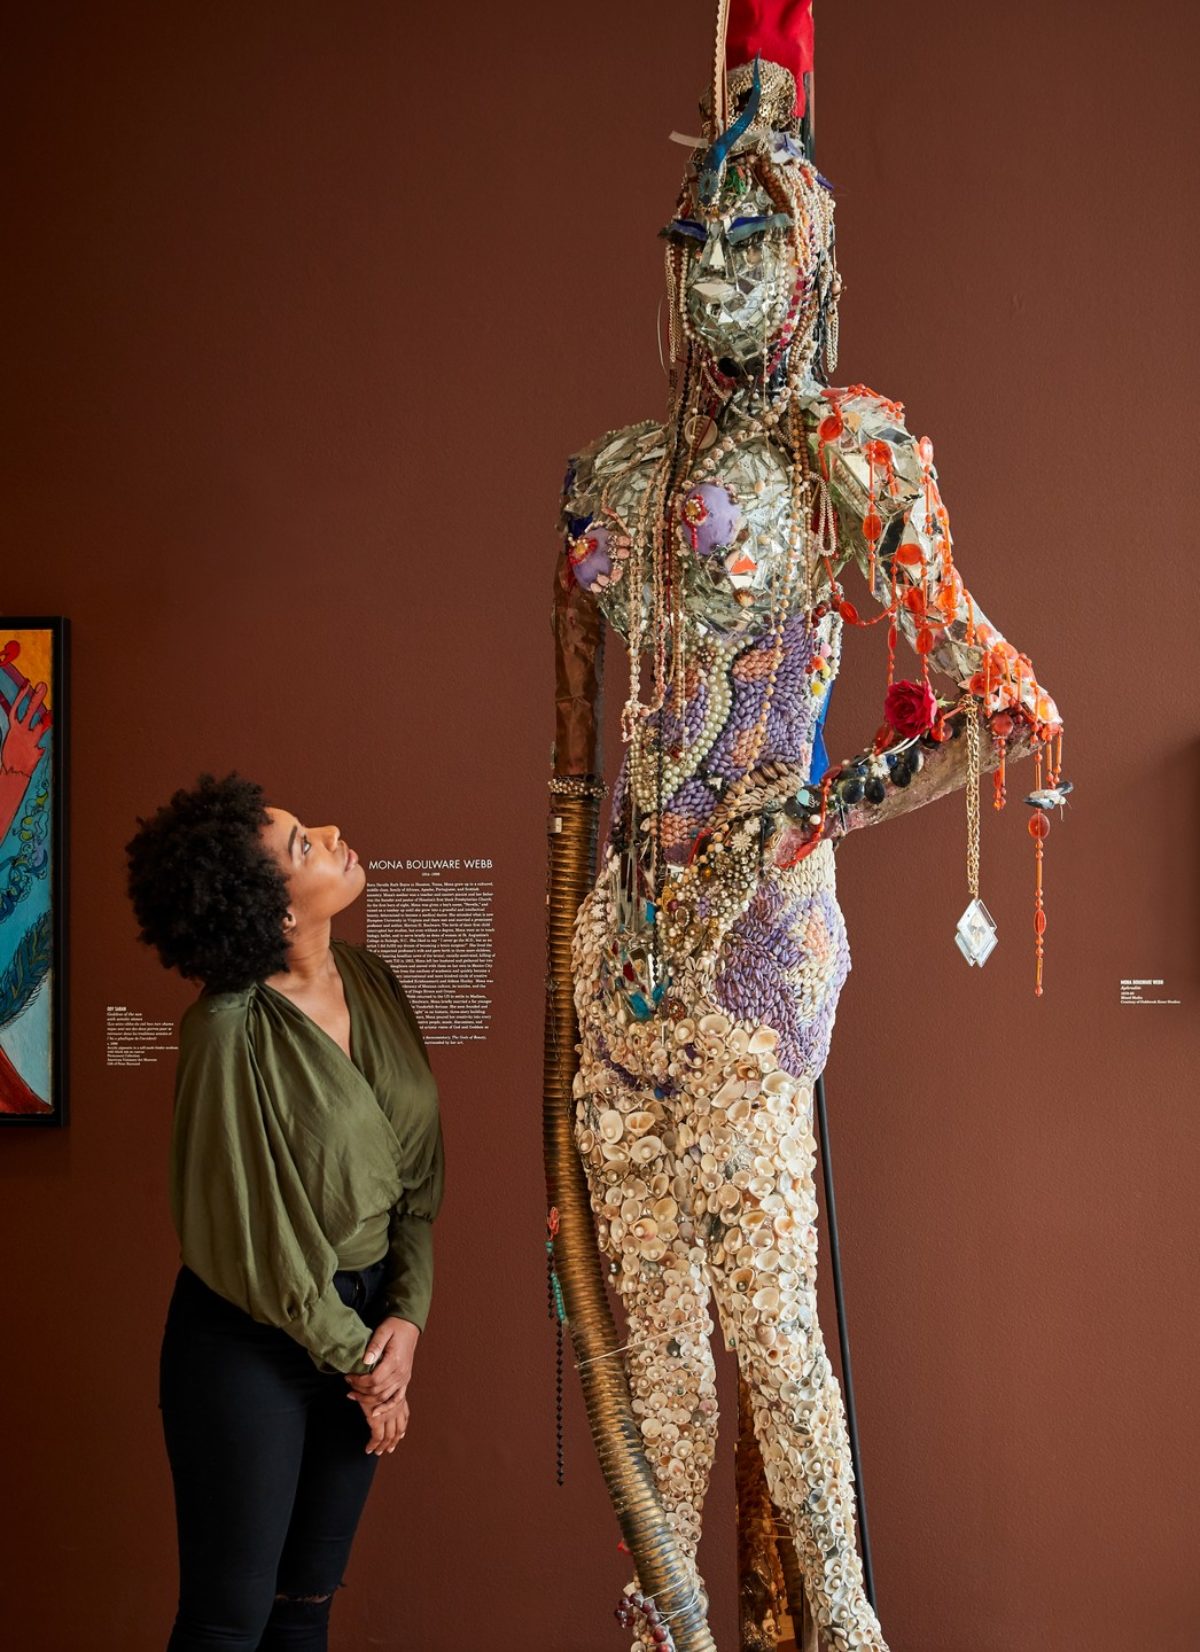 A woman admires a bejeweled statue at the American Visionary Art Museum